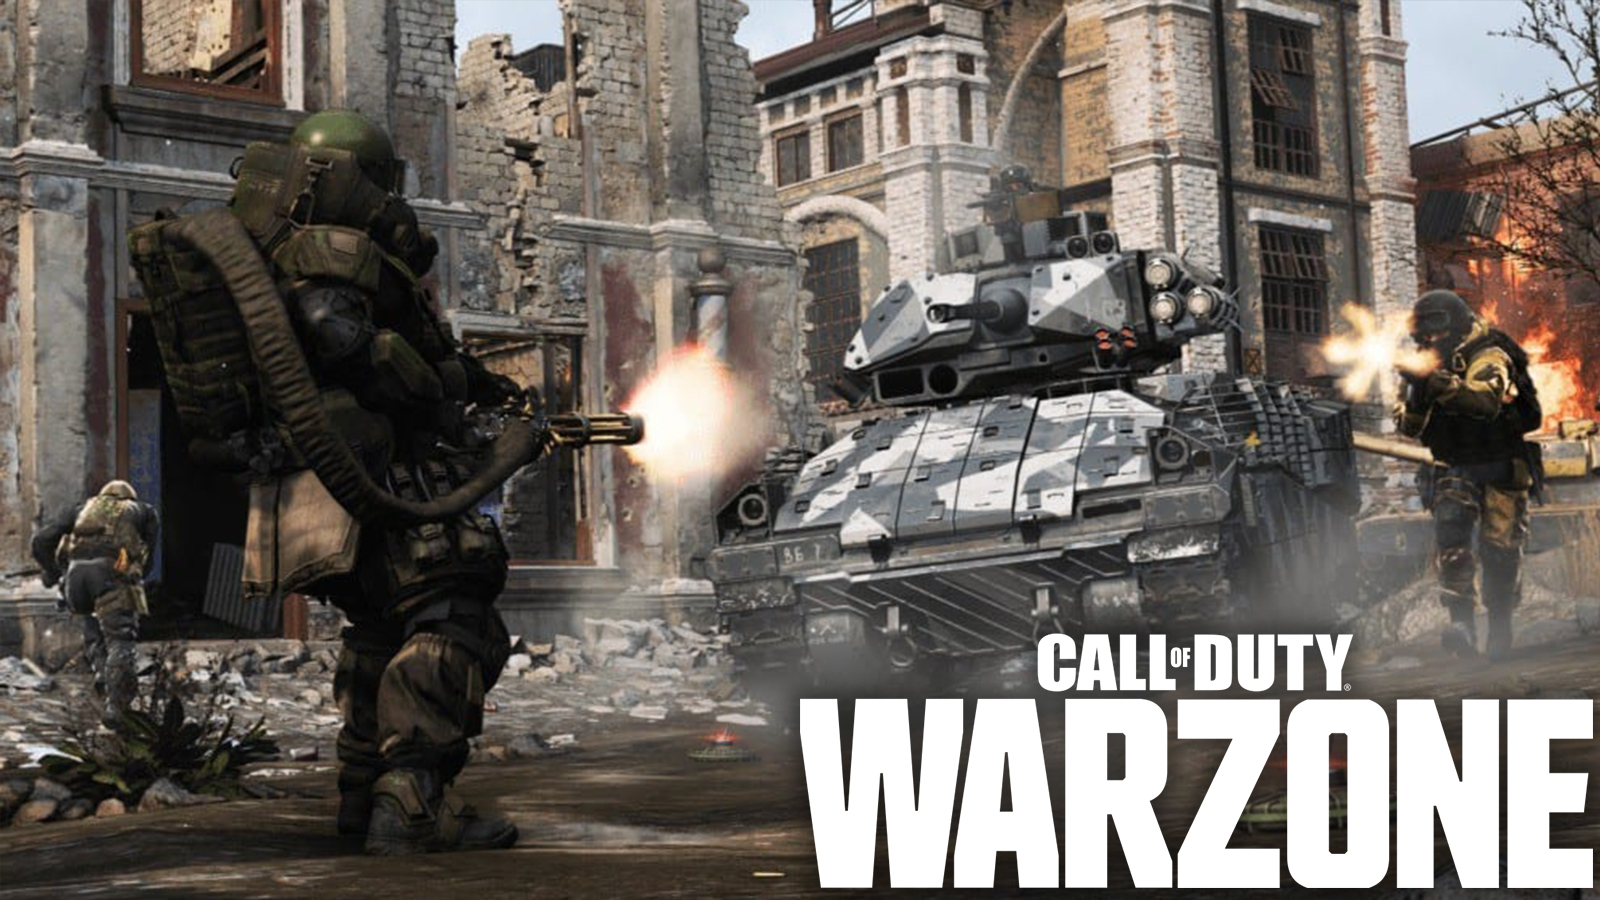 How to Change Language In Warzone and Modern Warfare 